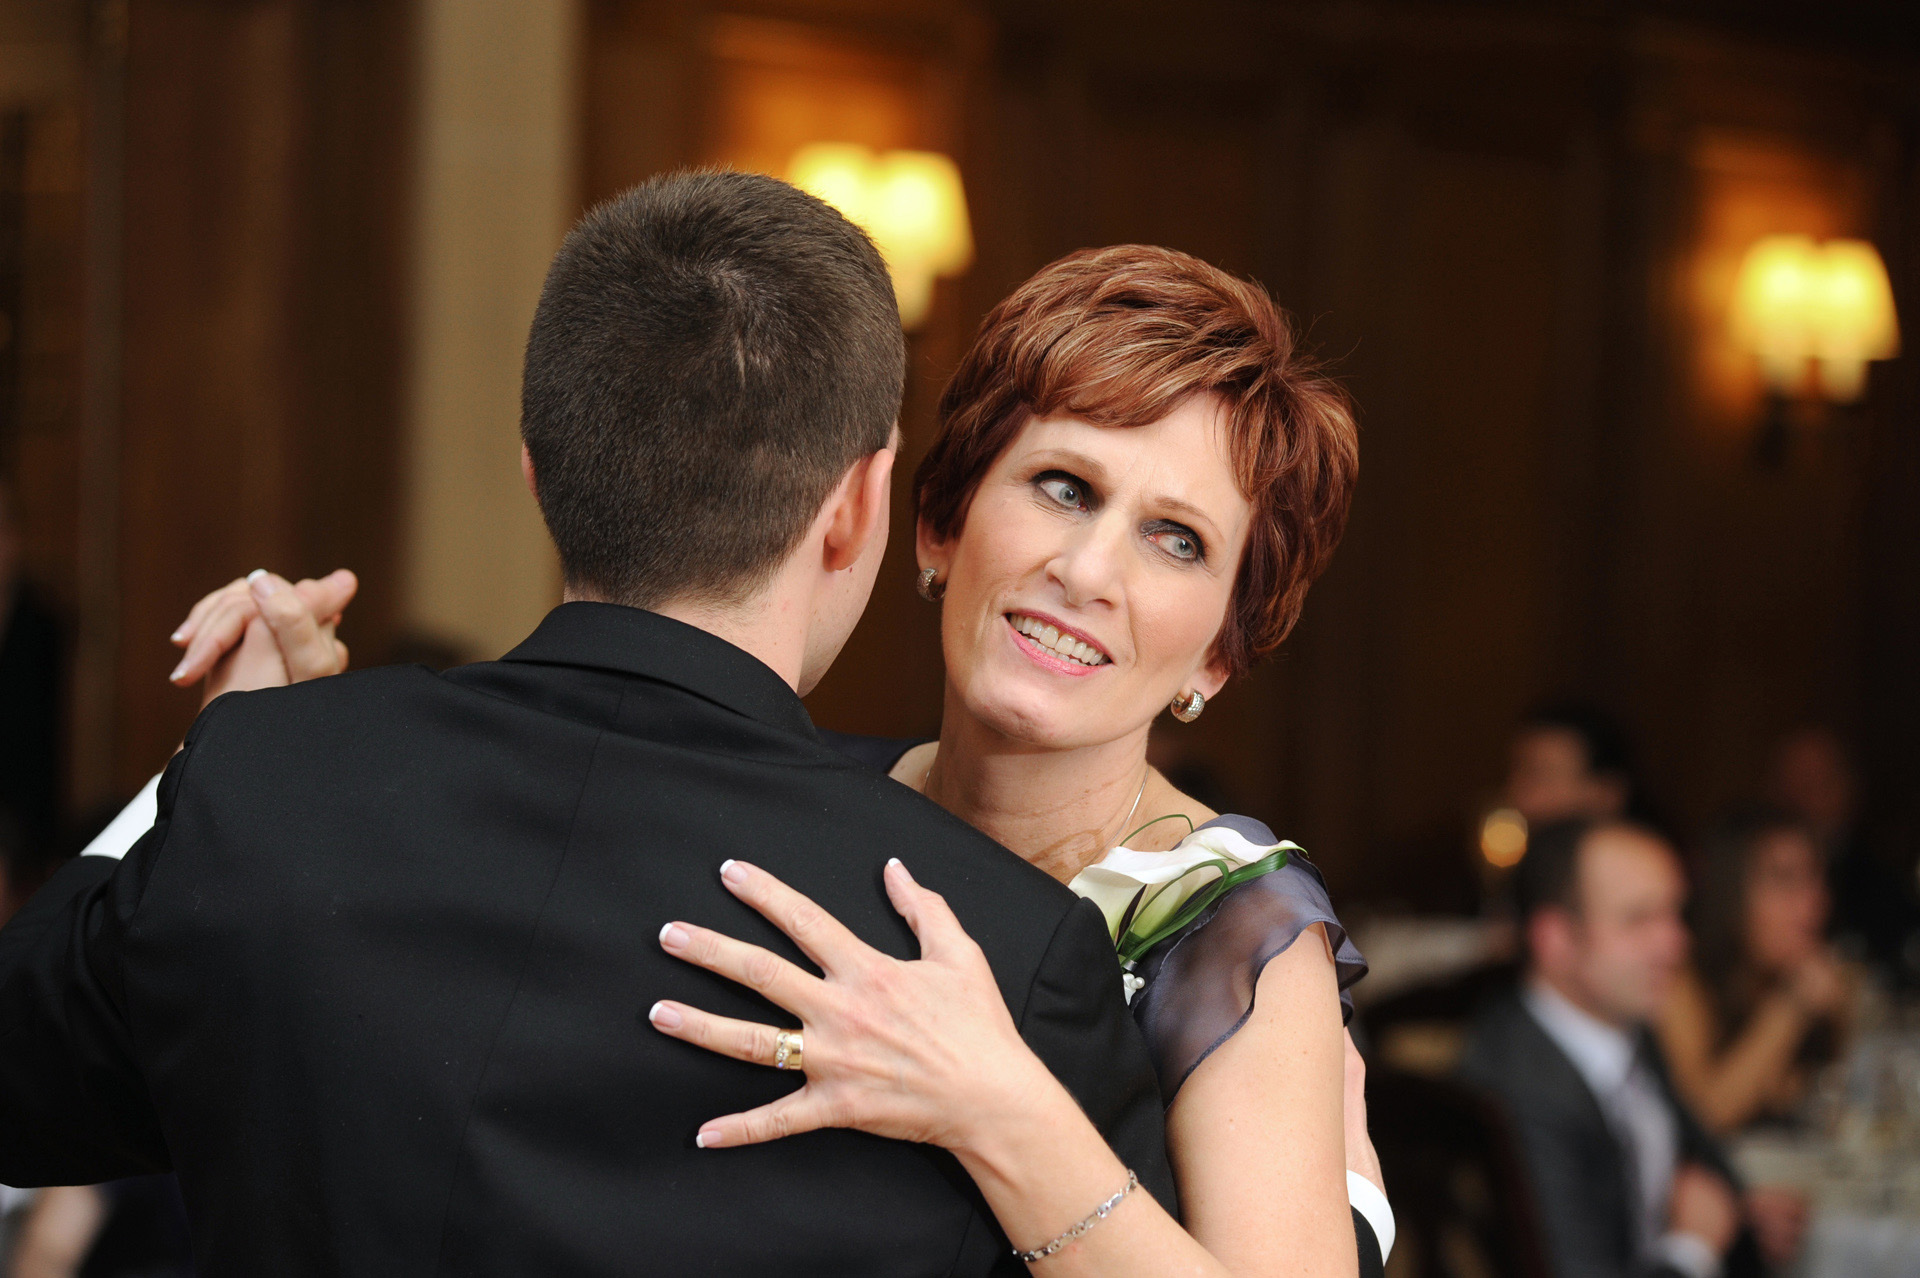 Michigan wedding at Detroit, Michigan, Michigan wedding shows a photograph of the groom dancing with his mother during the wedding reception at the Detroit Athletic Club.